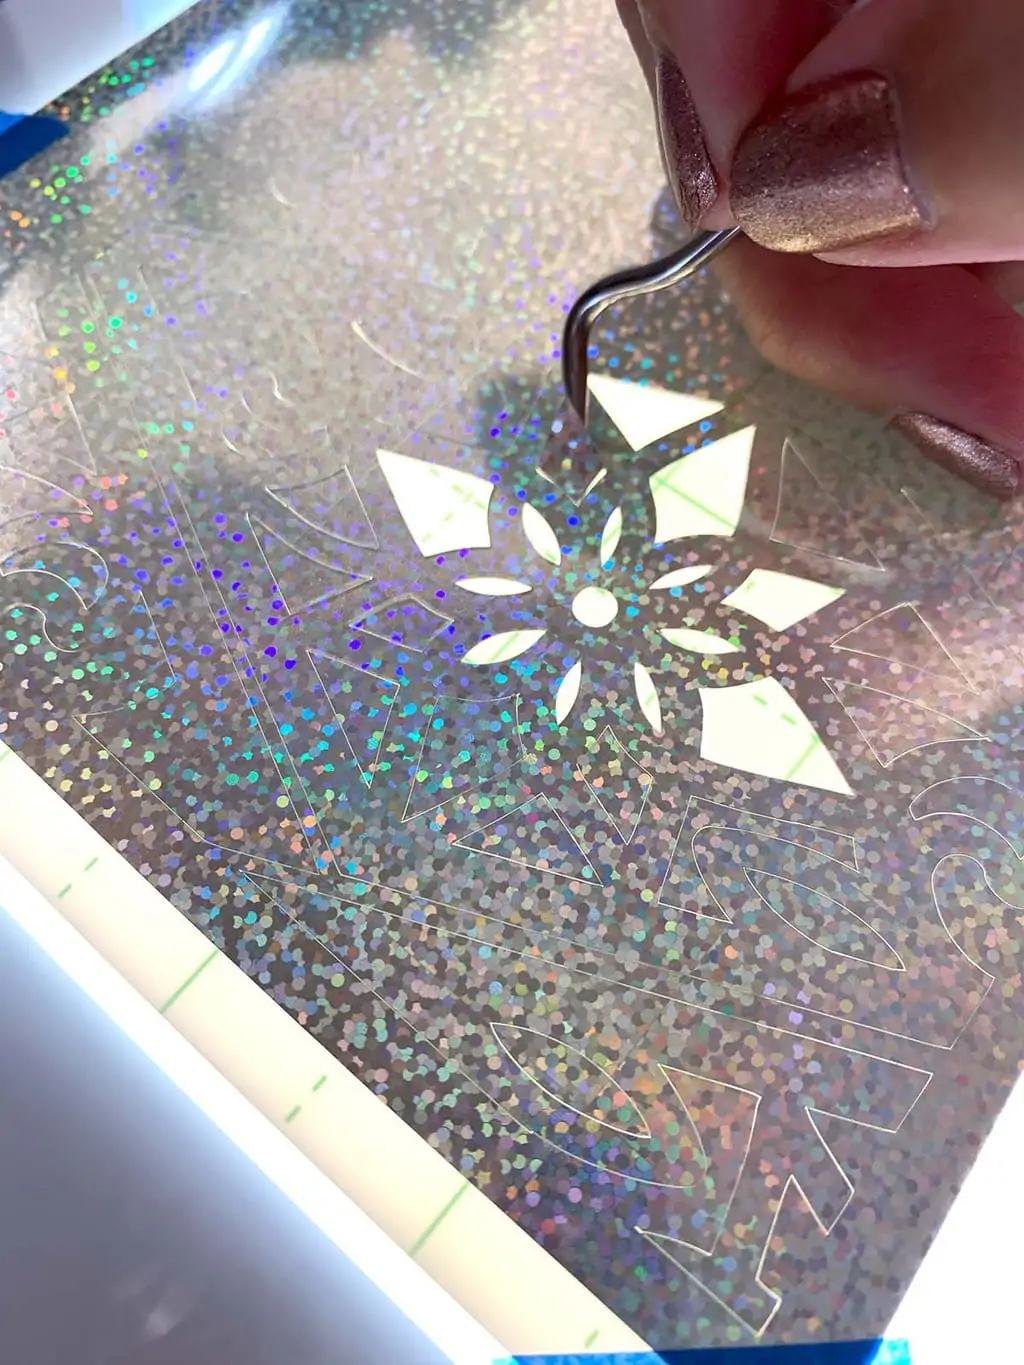 The Cricut BrightPad makes weeding easier by shining light through project cut lines